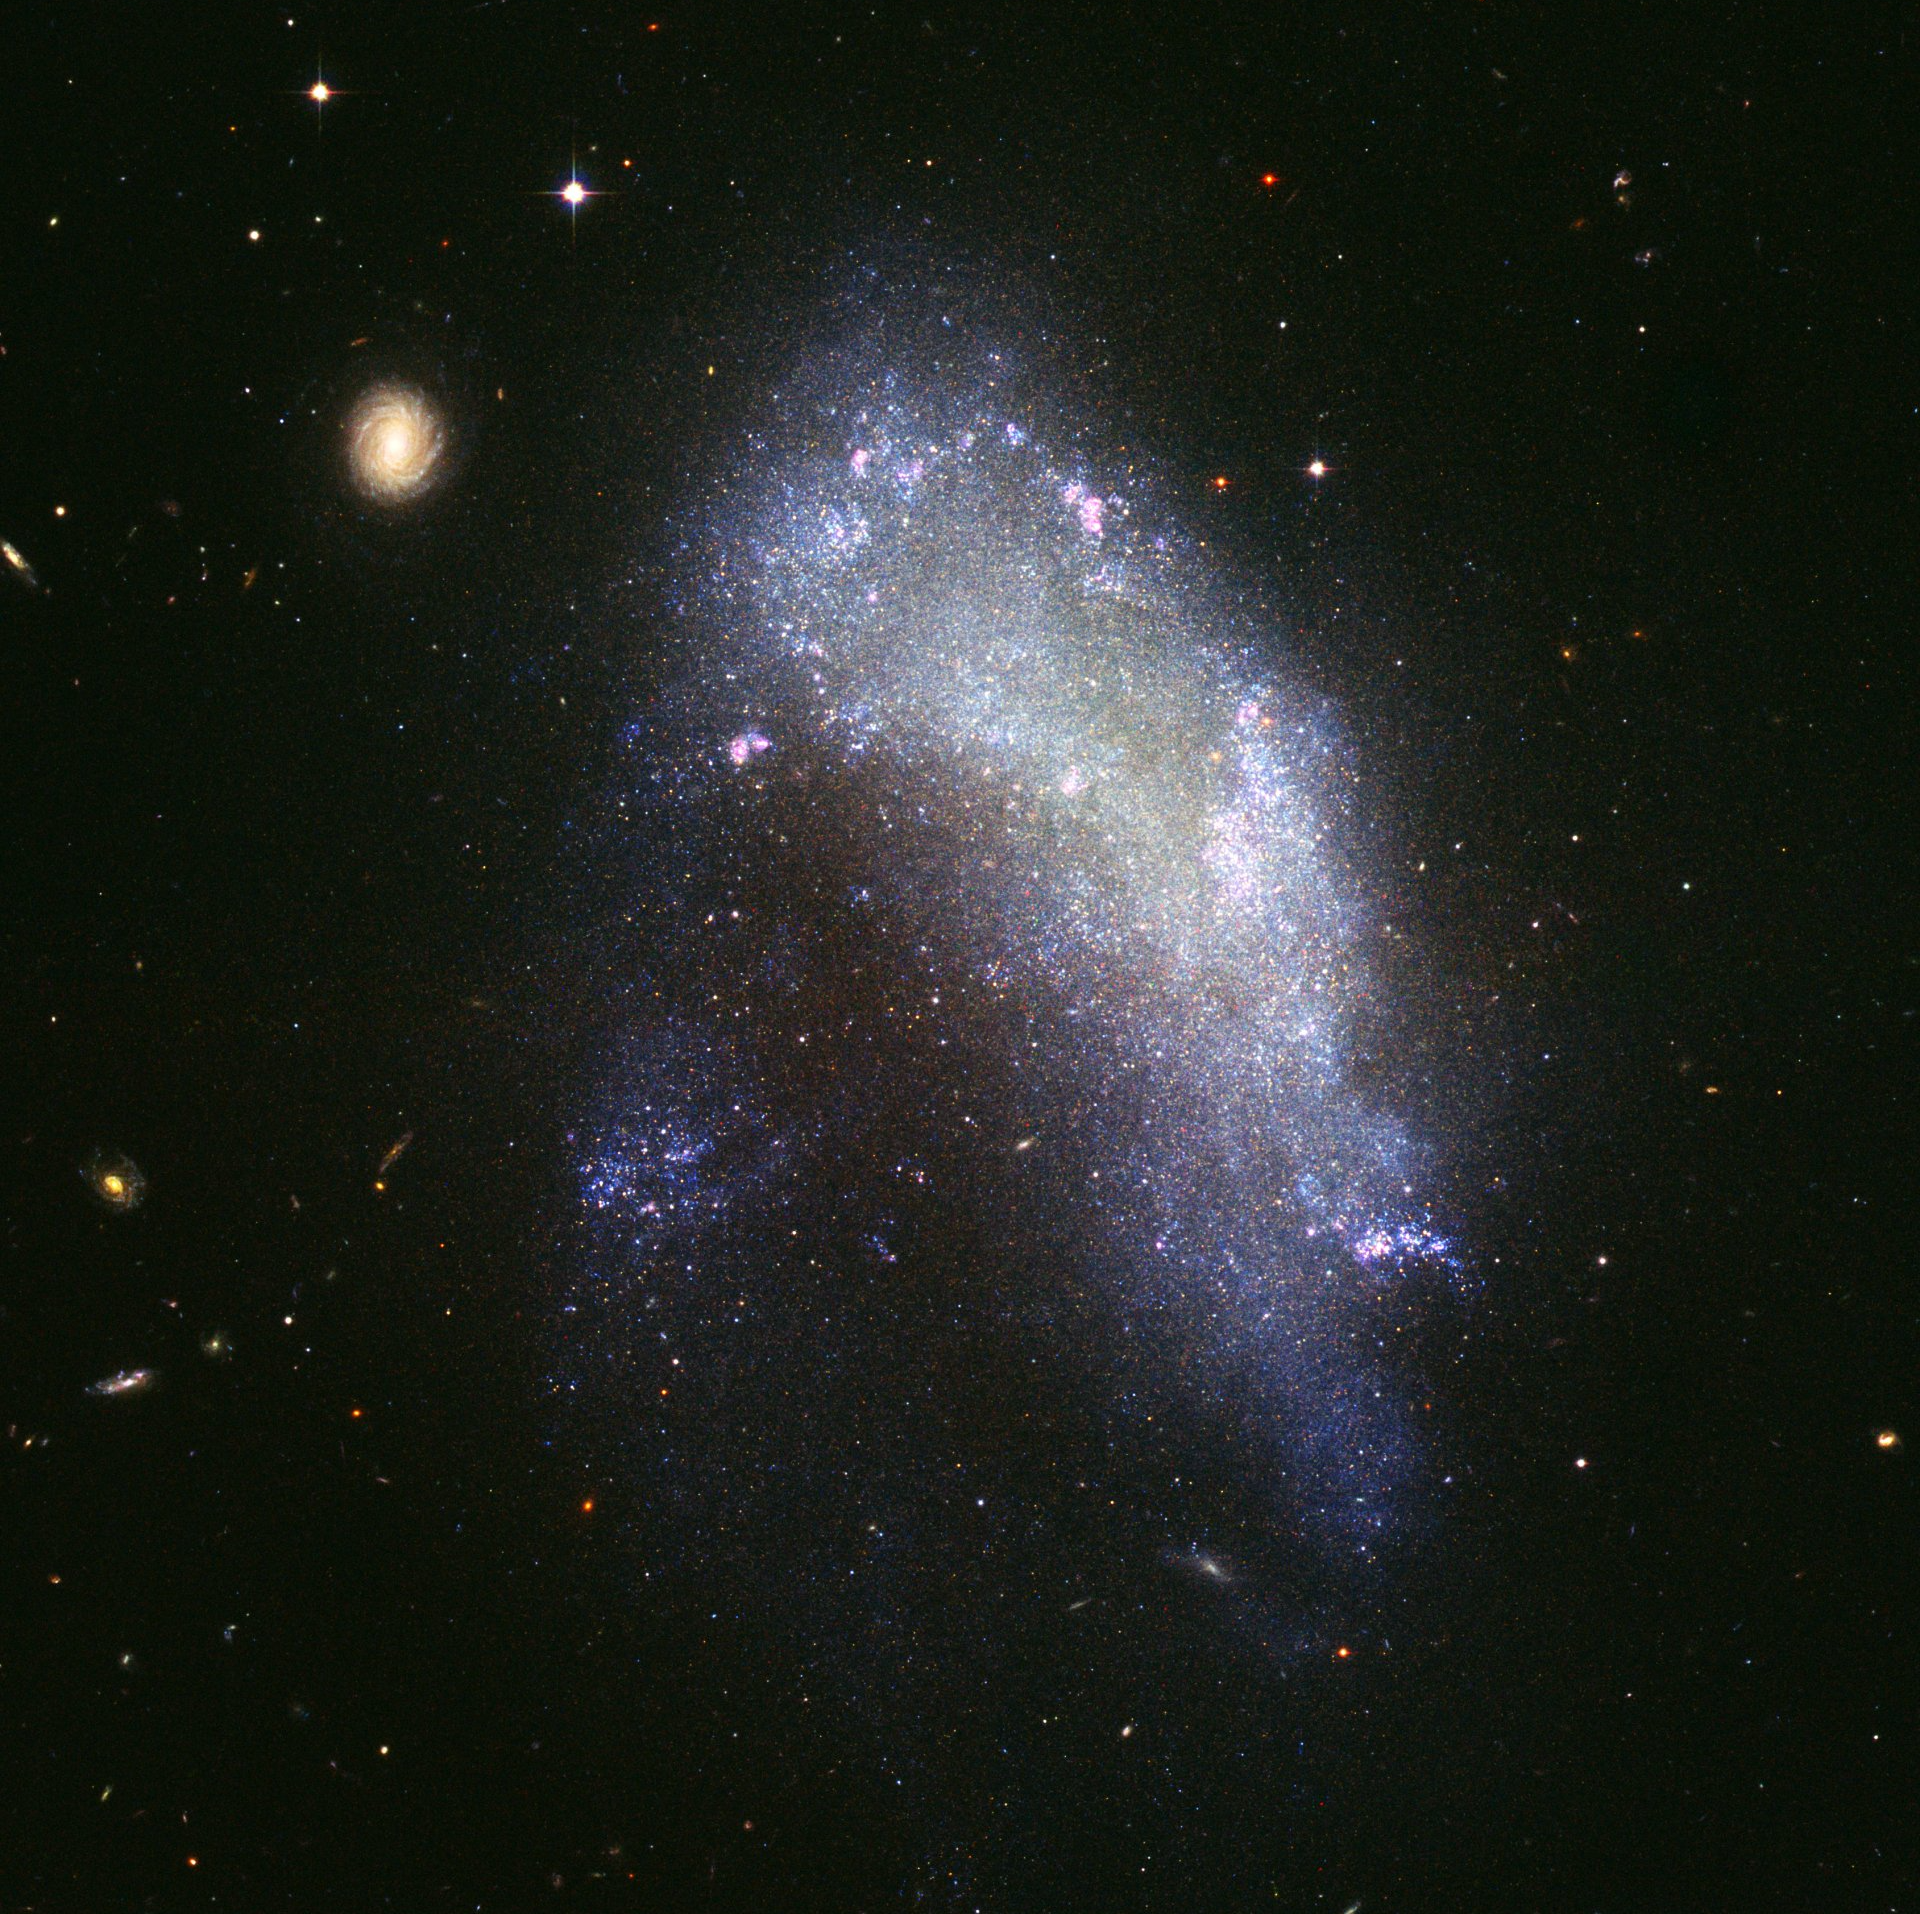 Photograph of the NGC 1427A galaxy captured by the hubble telescope